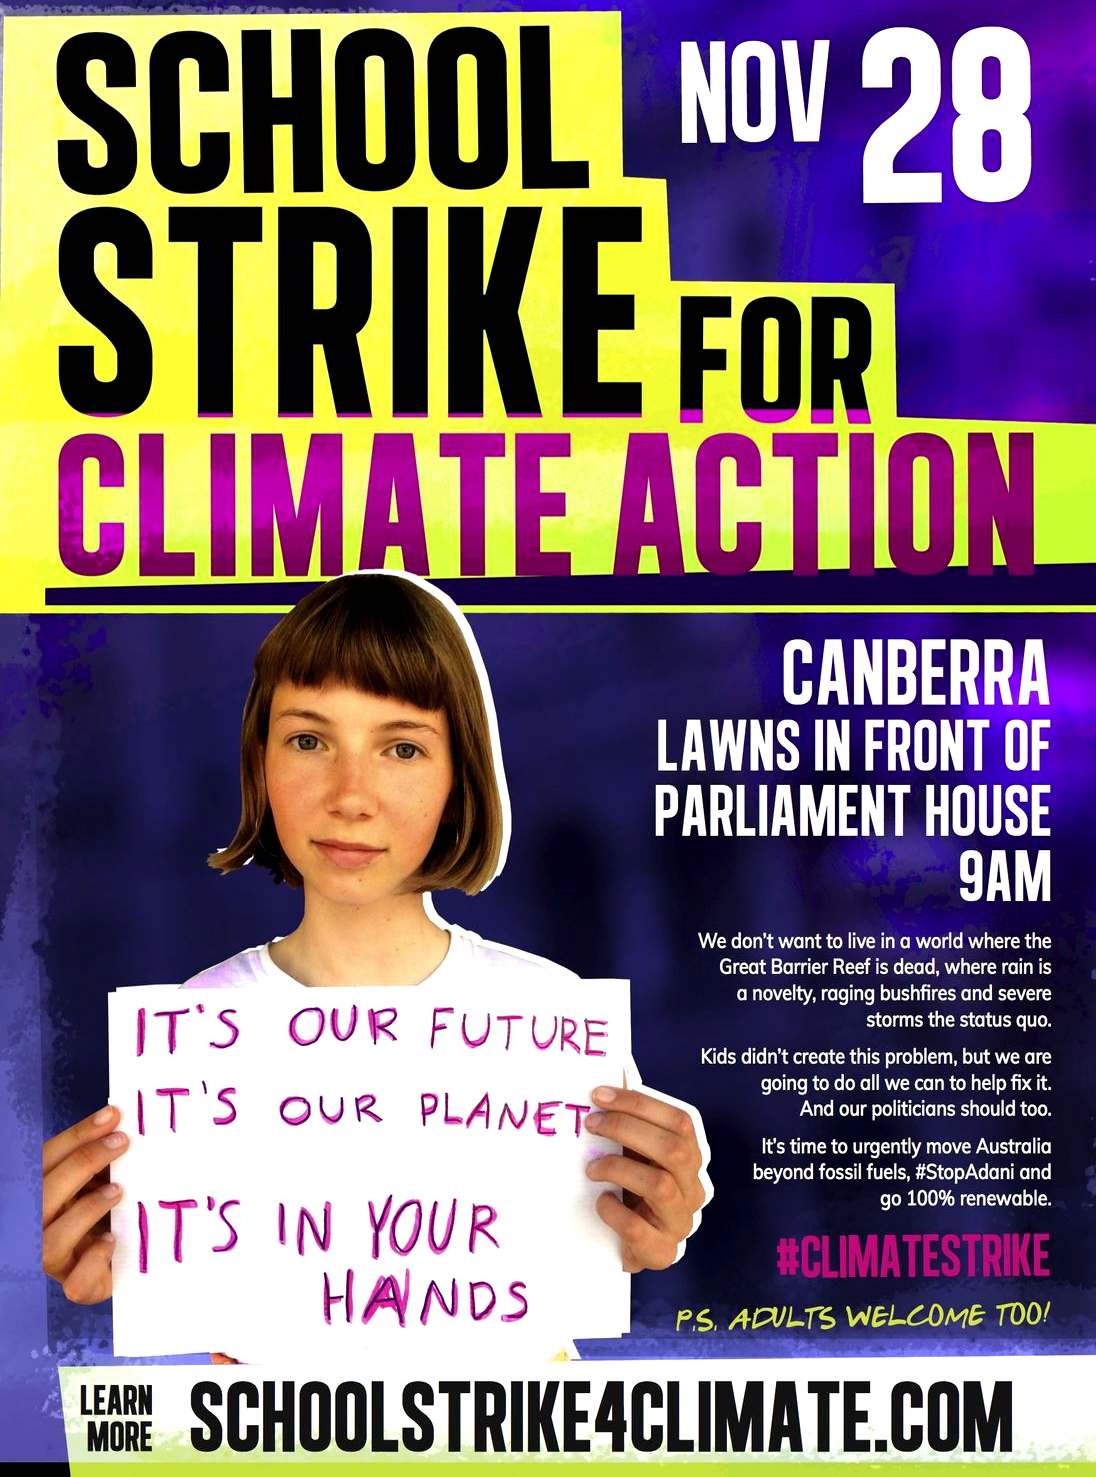 School strikes for climate change Canberra Australia